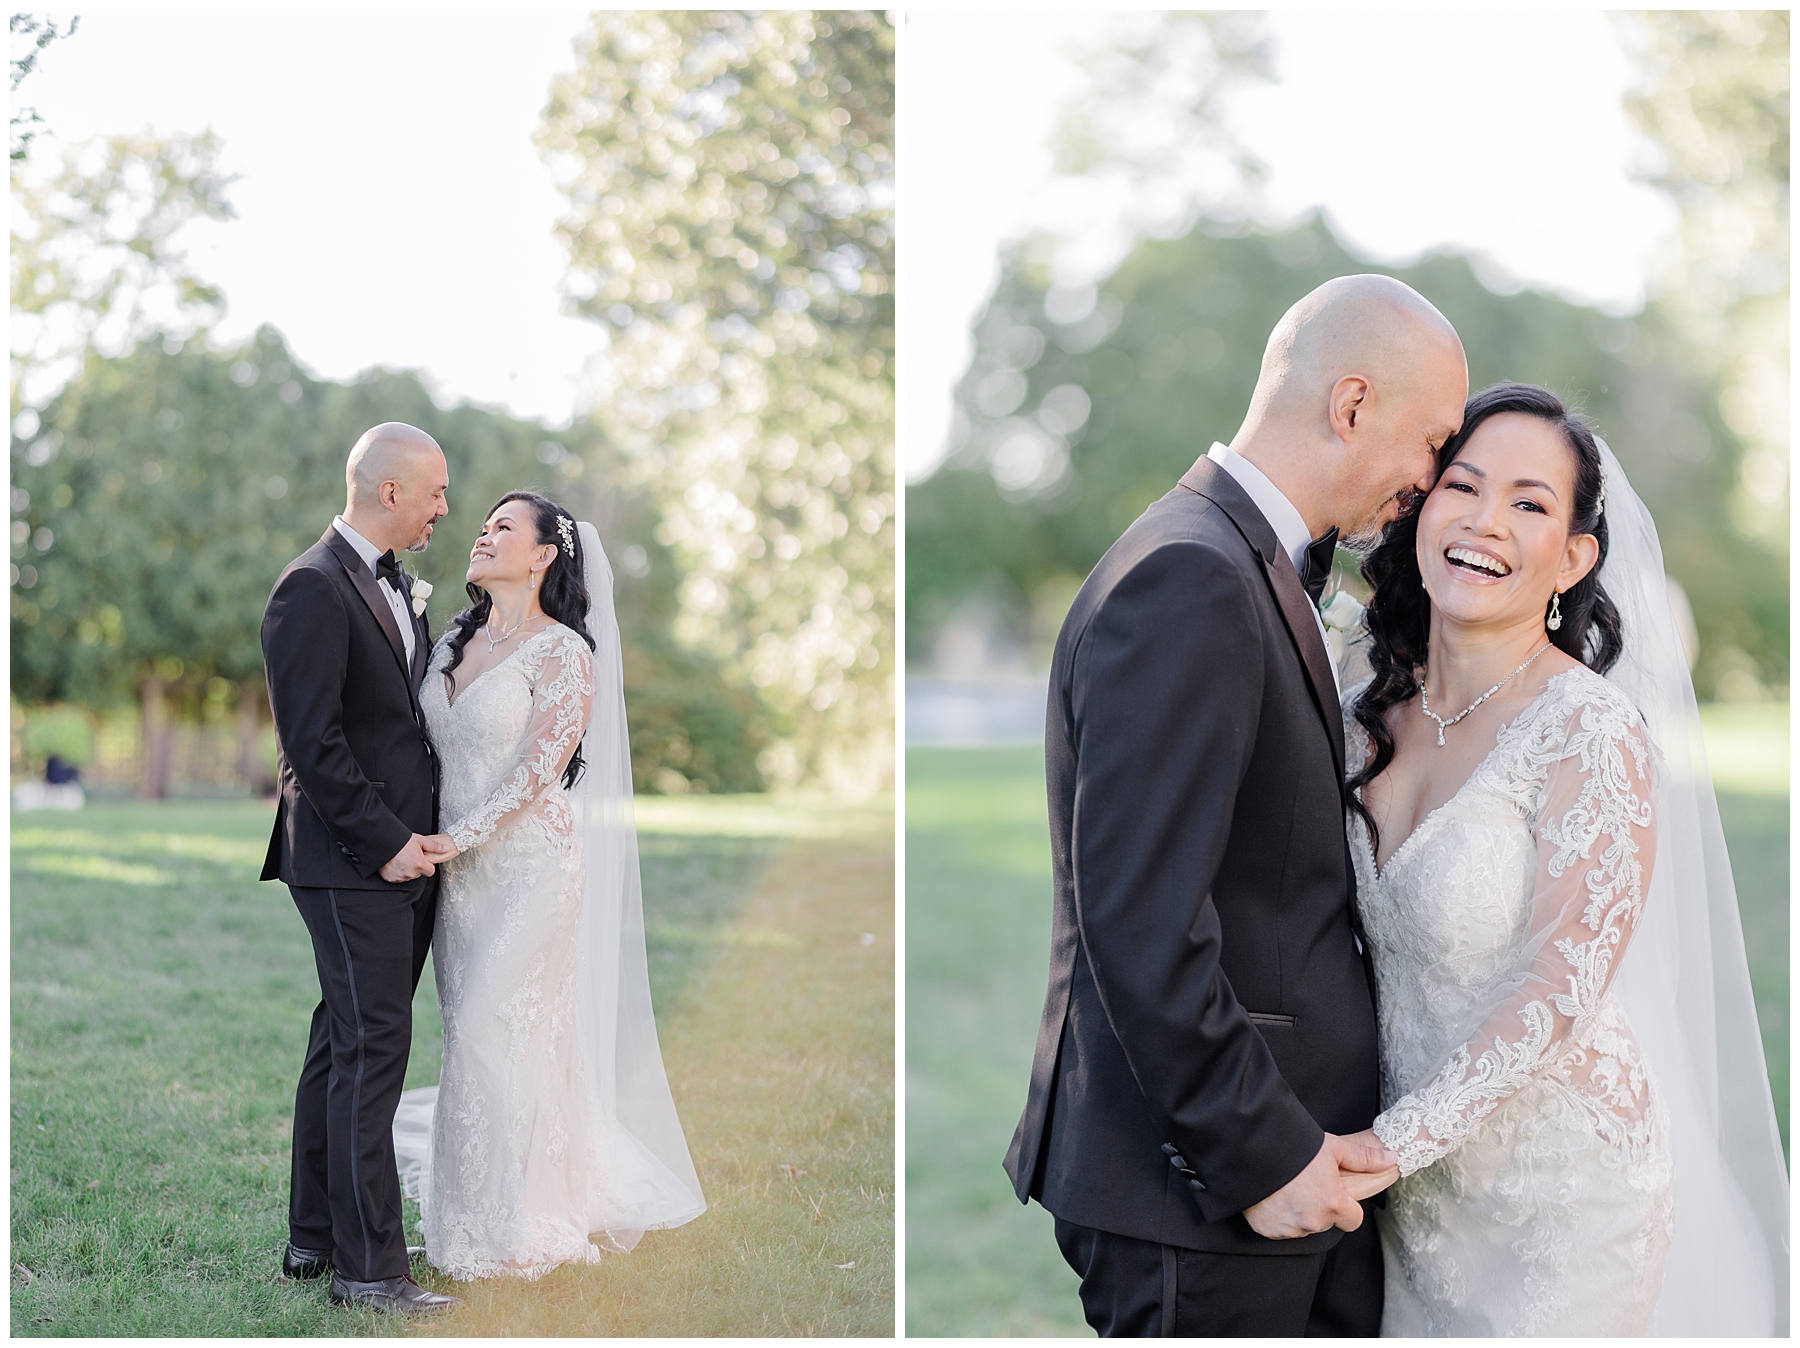 newlyweds share laughs after their Dreamy Norwich Connecticut Wedding at The Spa at Norwich Inn